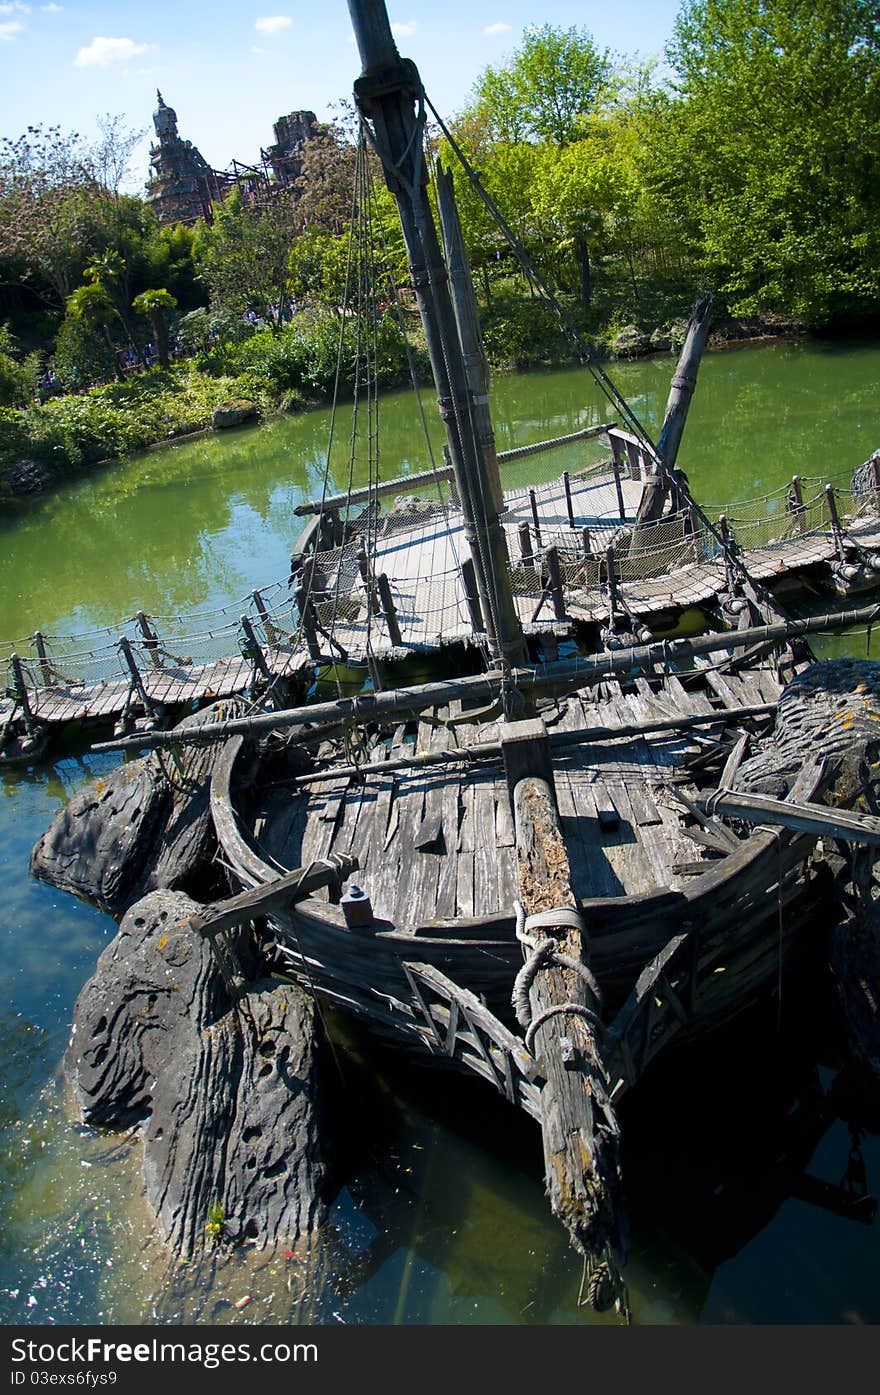 A shipwreck abandoned in a river, now being used to help support a walkbridge